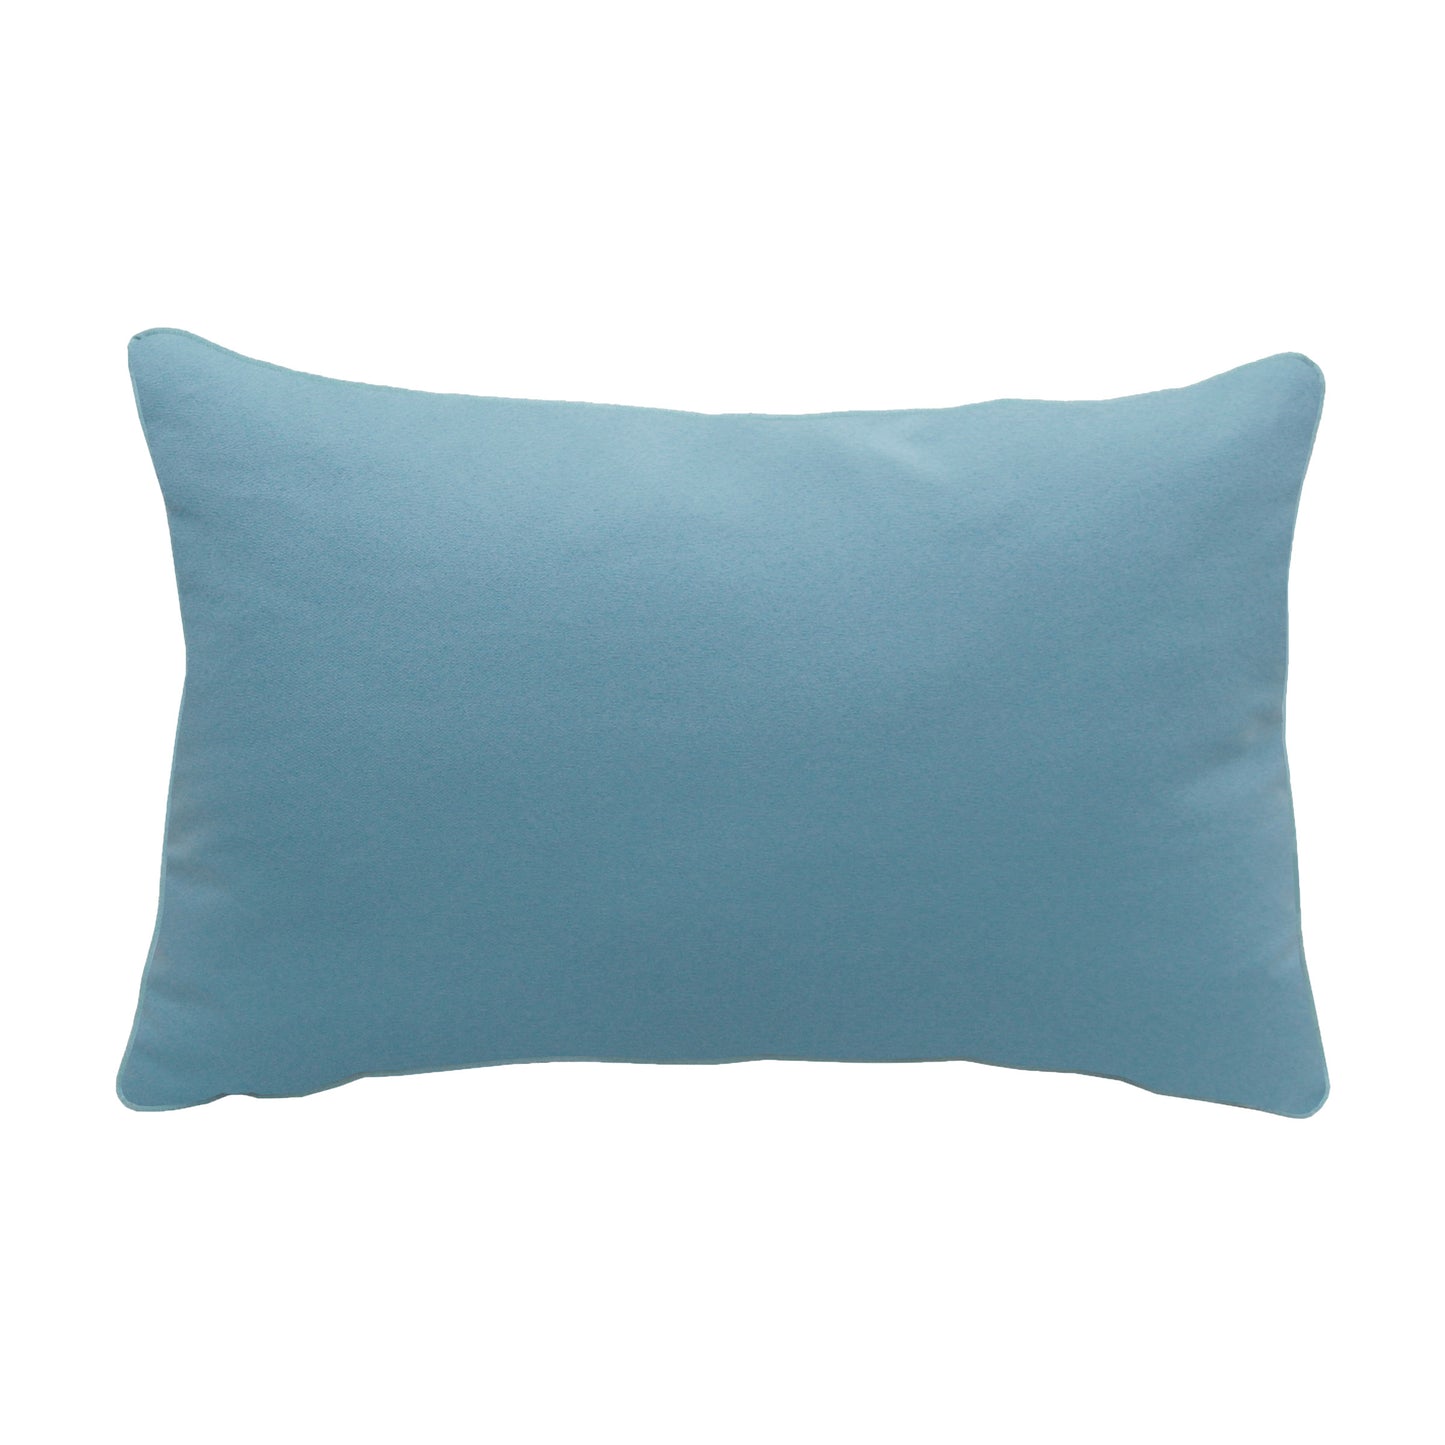 Solid blue fabric; back side of the Chameleon pillow.